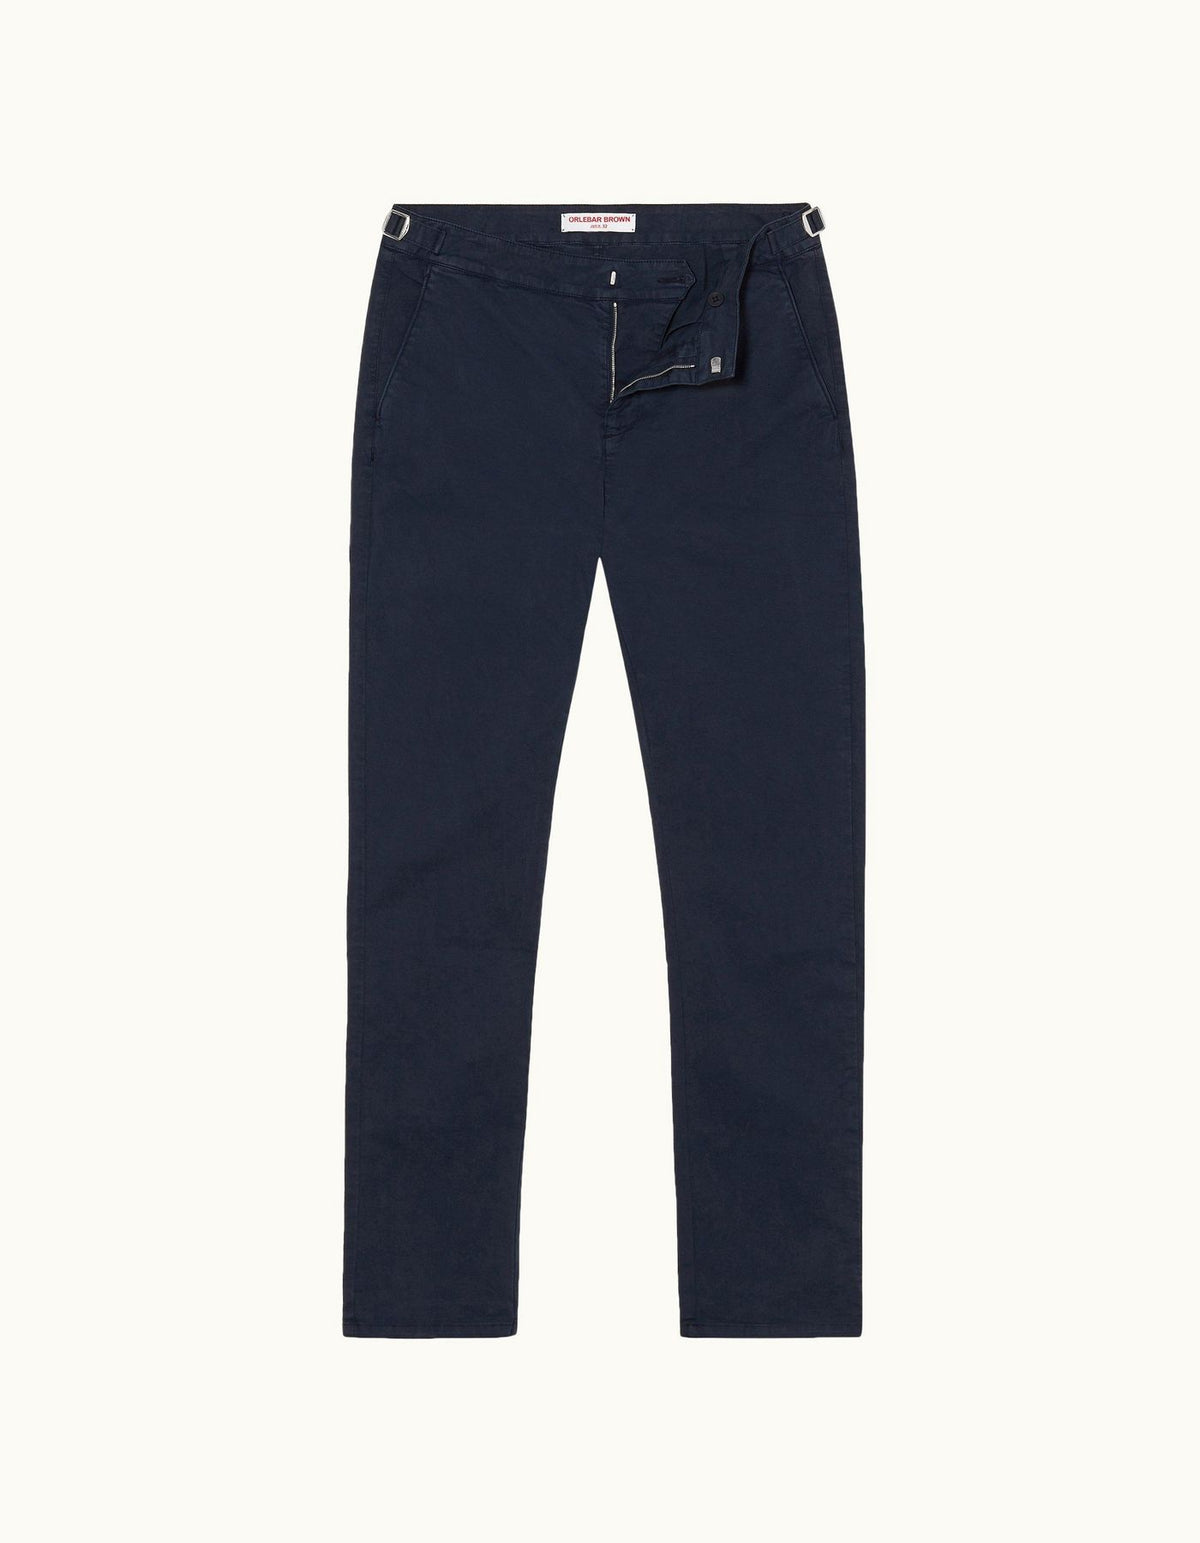 Men's CAMPBELL II Slim Fit Stretch Chino - Navy